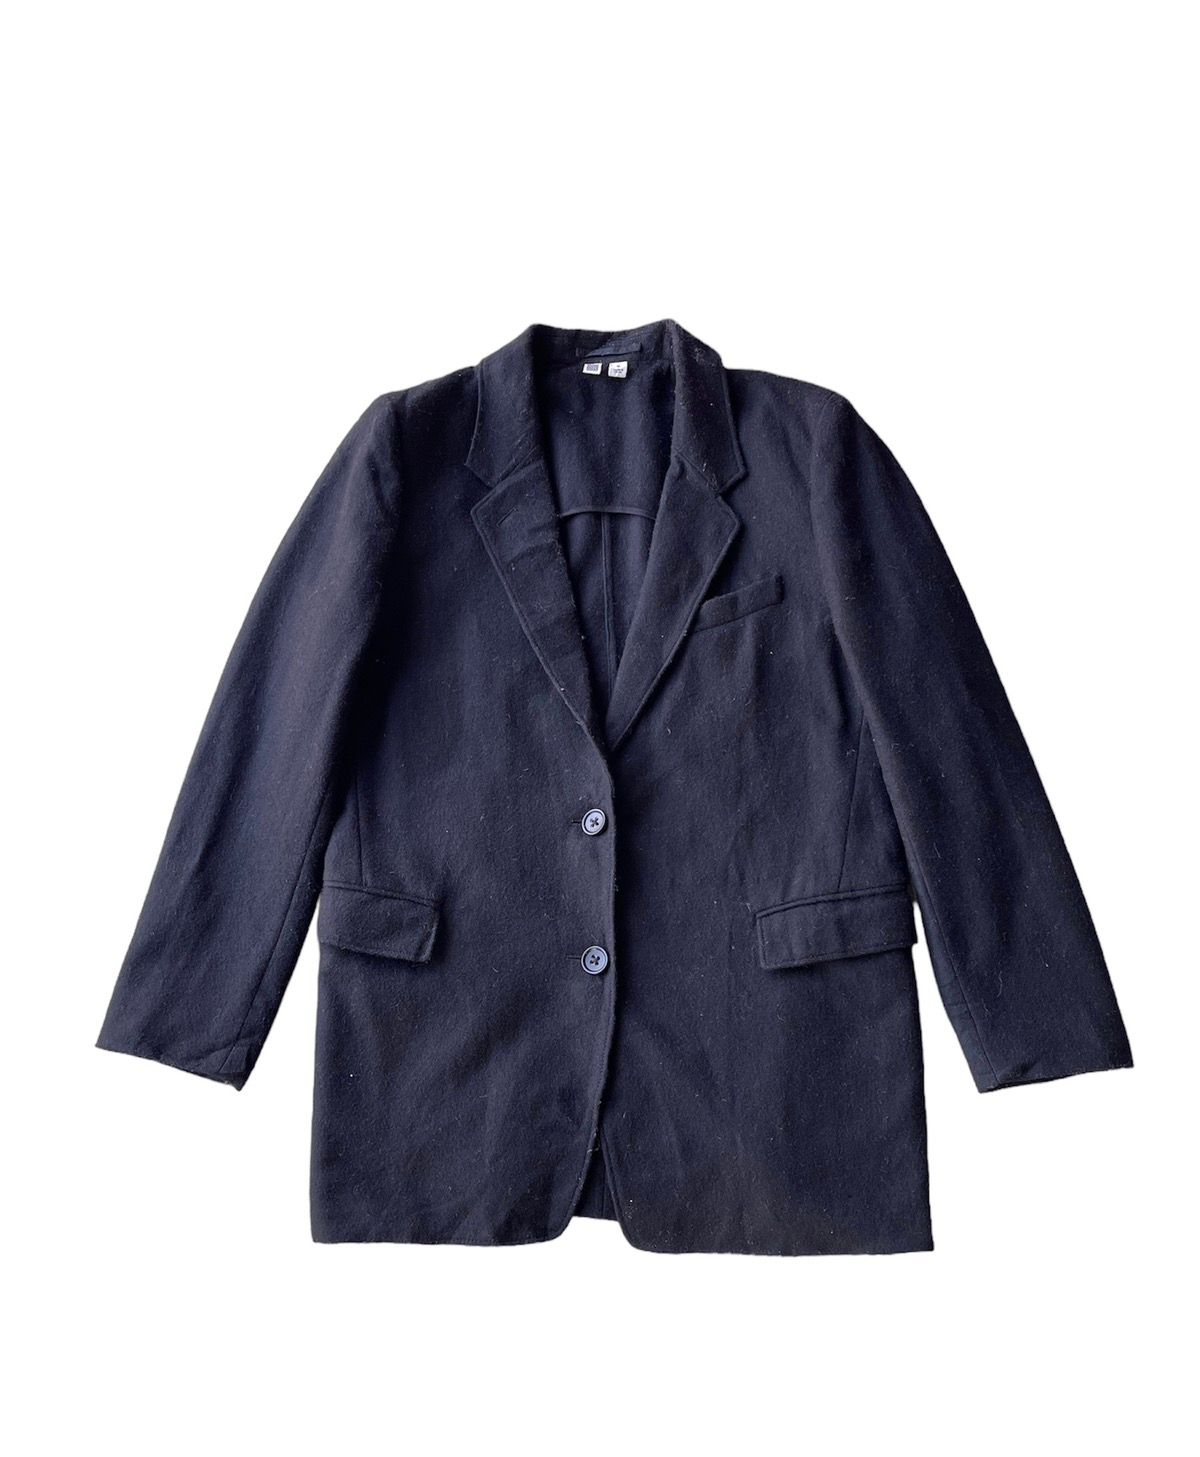 UNIQLO UNDERCOVER WOOL SUIT JACKET - 1